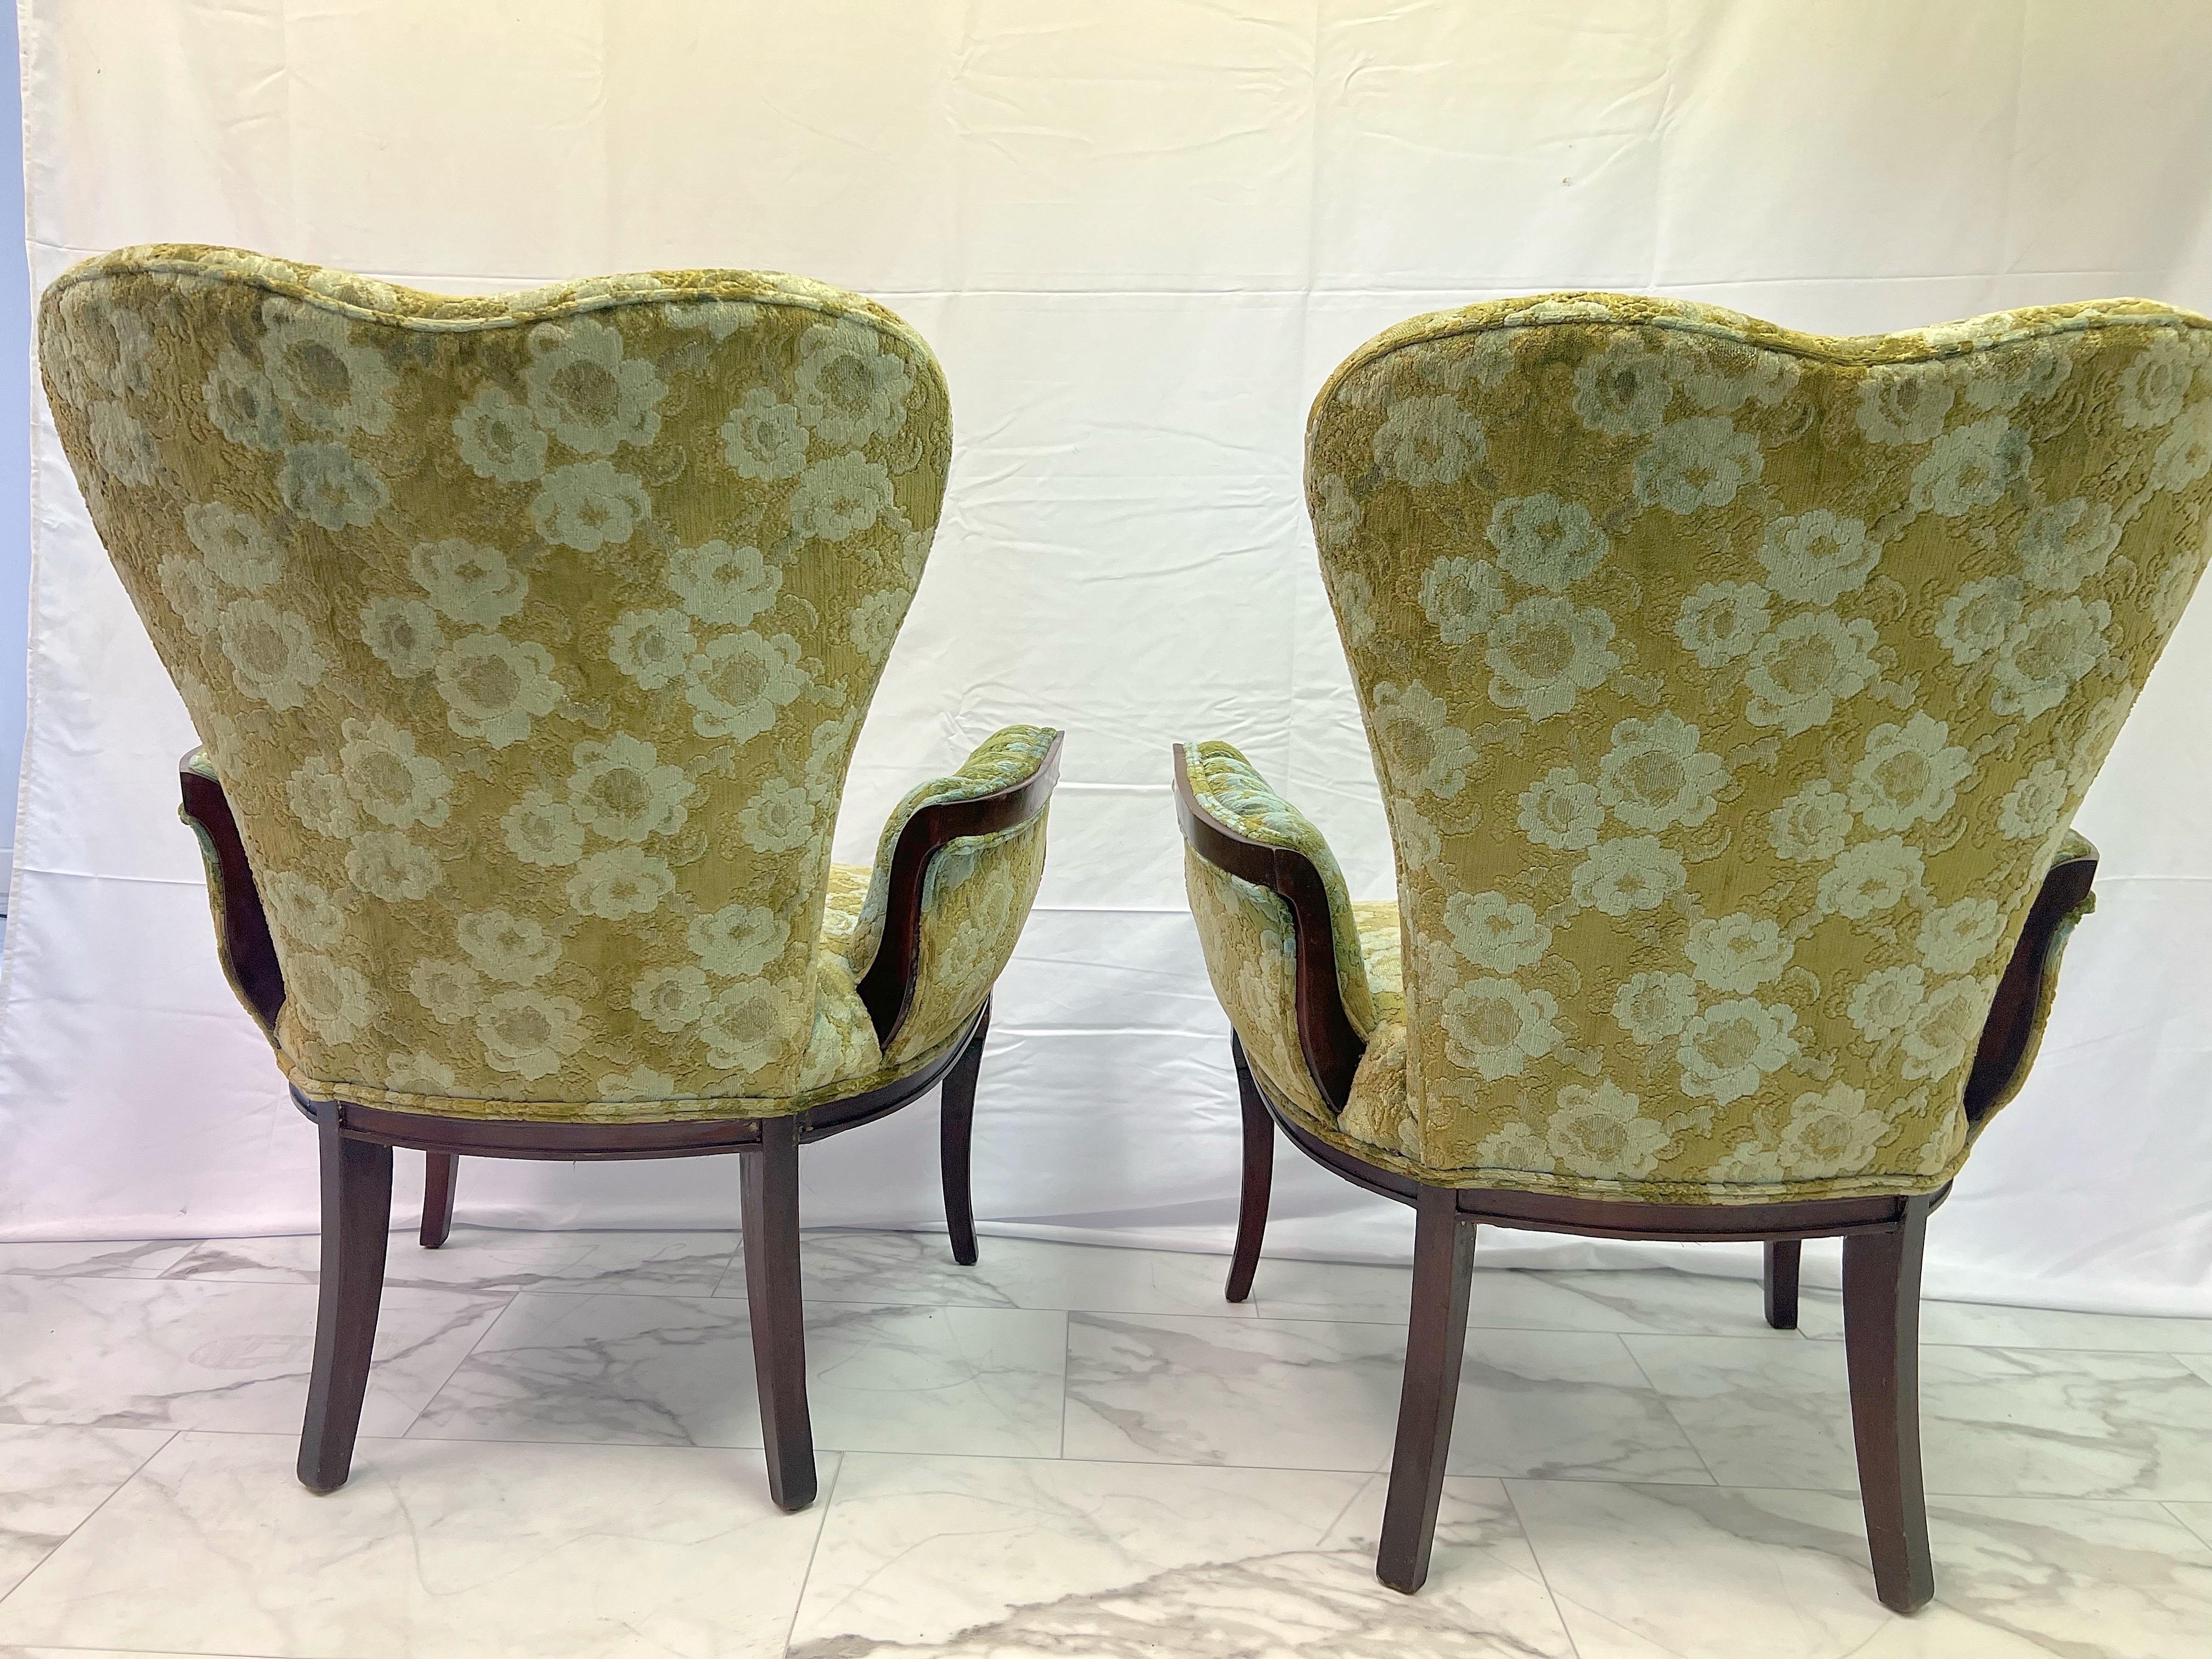 Grosfeld House Attributed Fireside Chairs in Green Floral Upholstery - a Pair For Sale 3